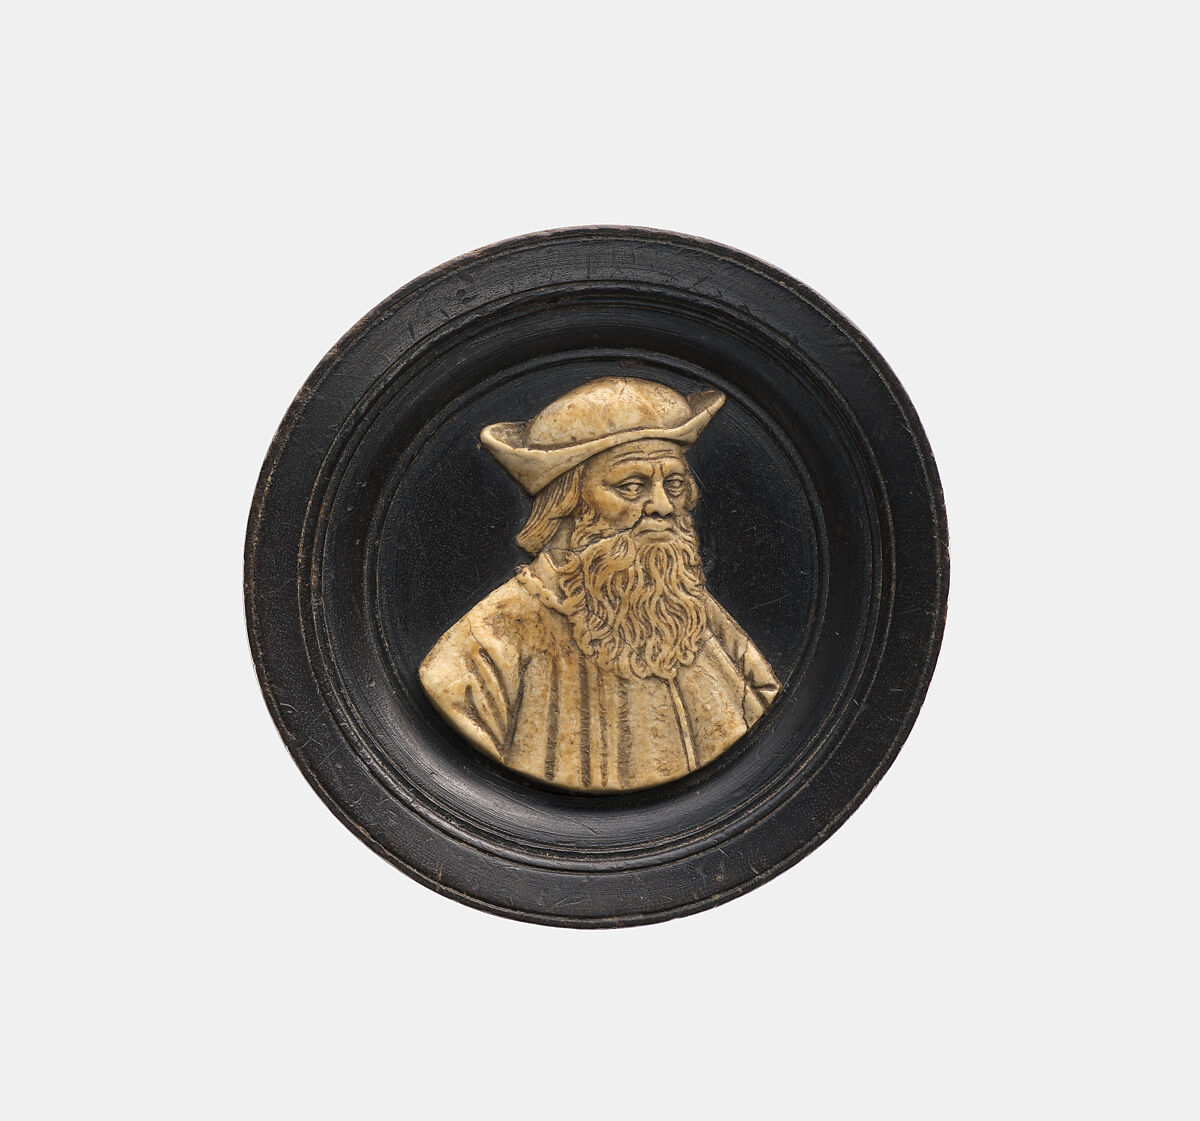 Portrait of a Humanist (possibly Johann Caesarius, Ph.D. and M.D., born Juelich 1468), Unknown South German artist, Ground marble on ebony, Southern German 